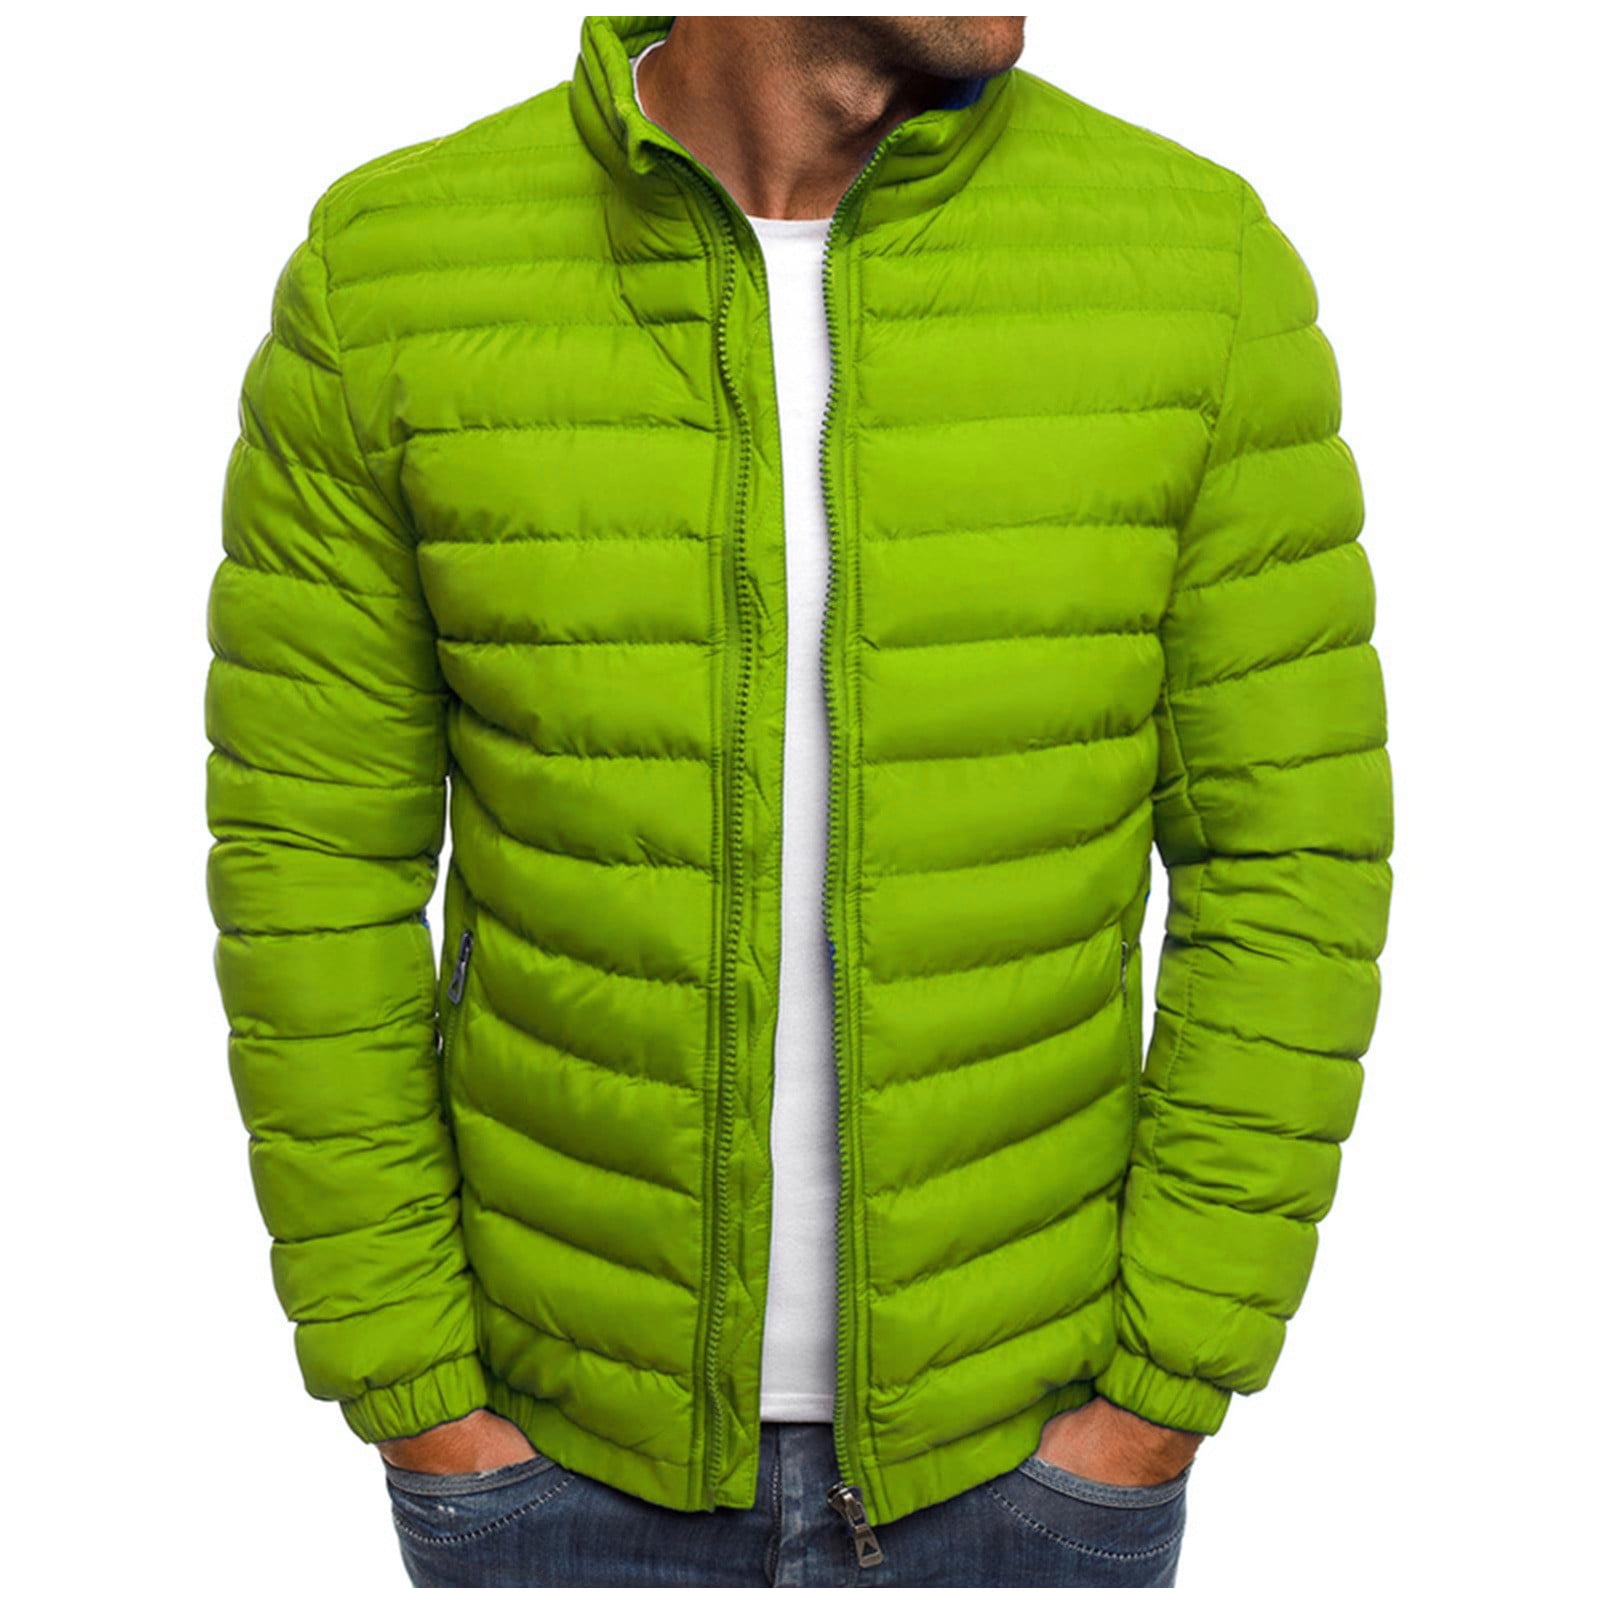 Green and Gold Jacket | Print Jackets | Buy Jackets Online | Mann Sey